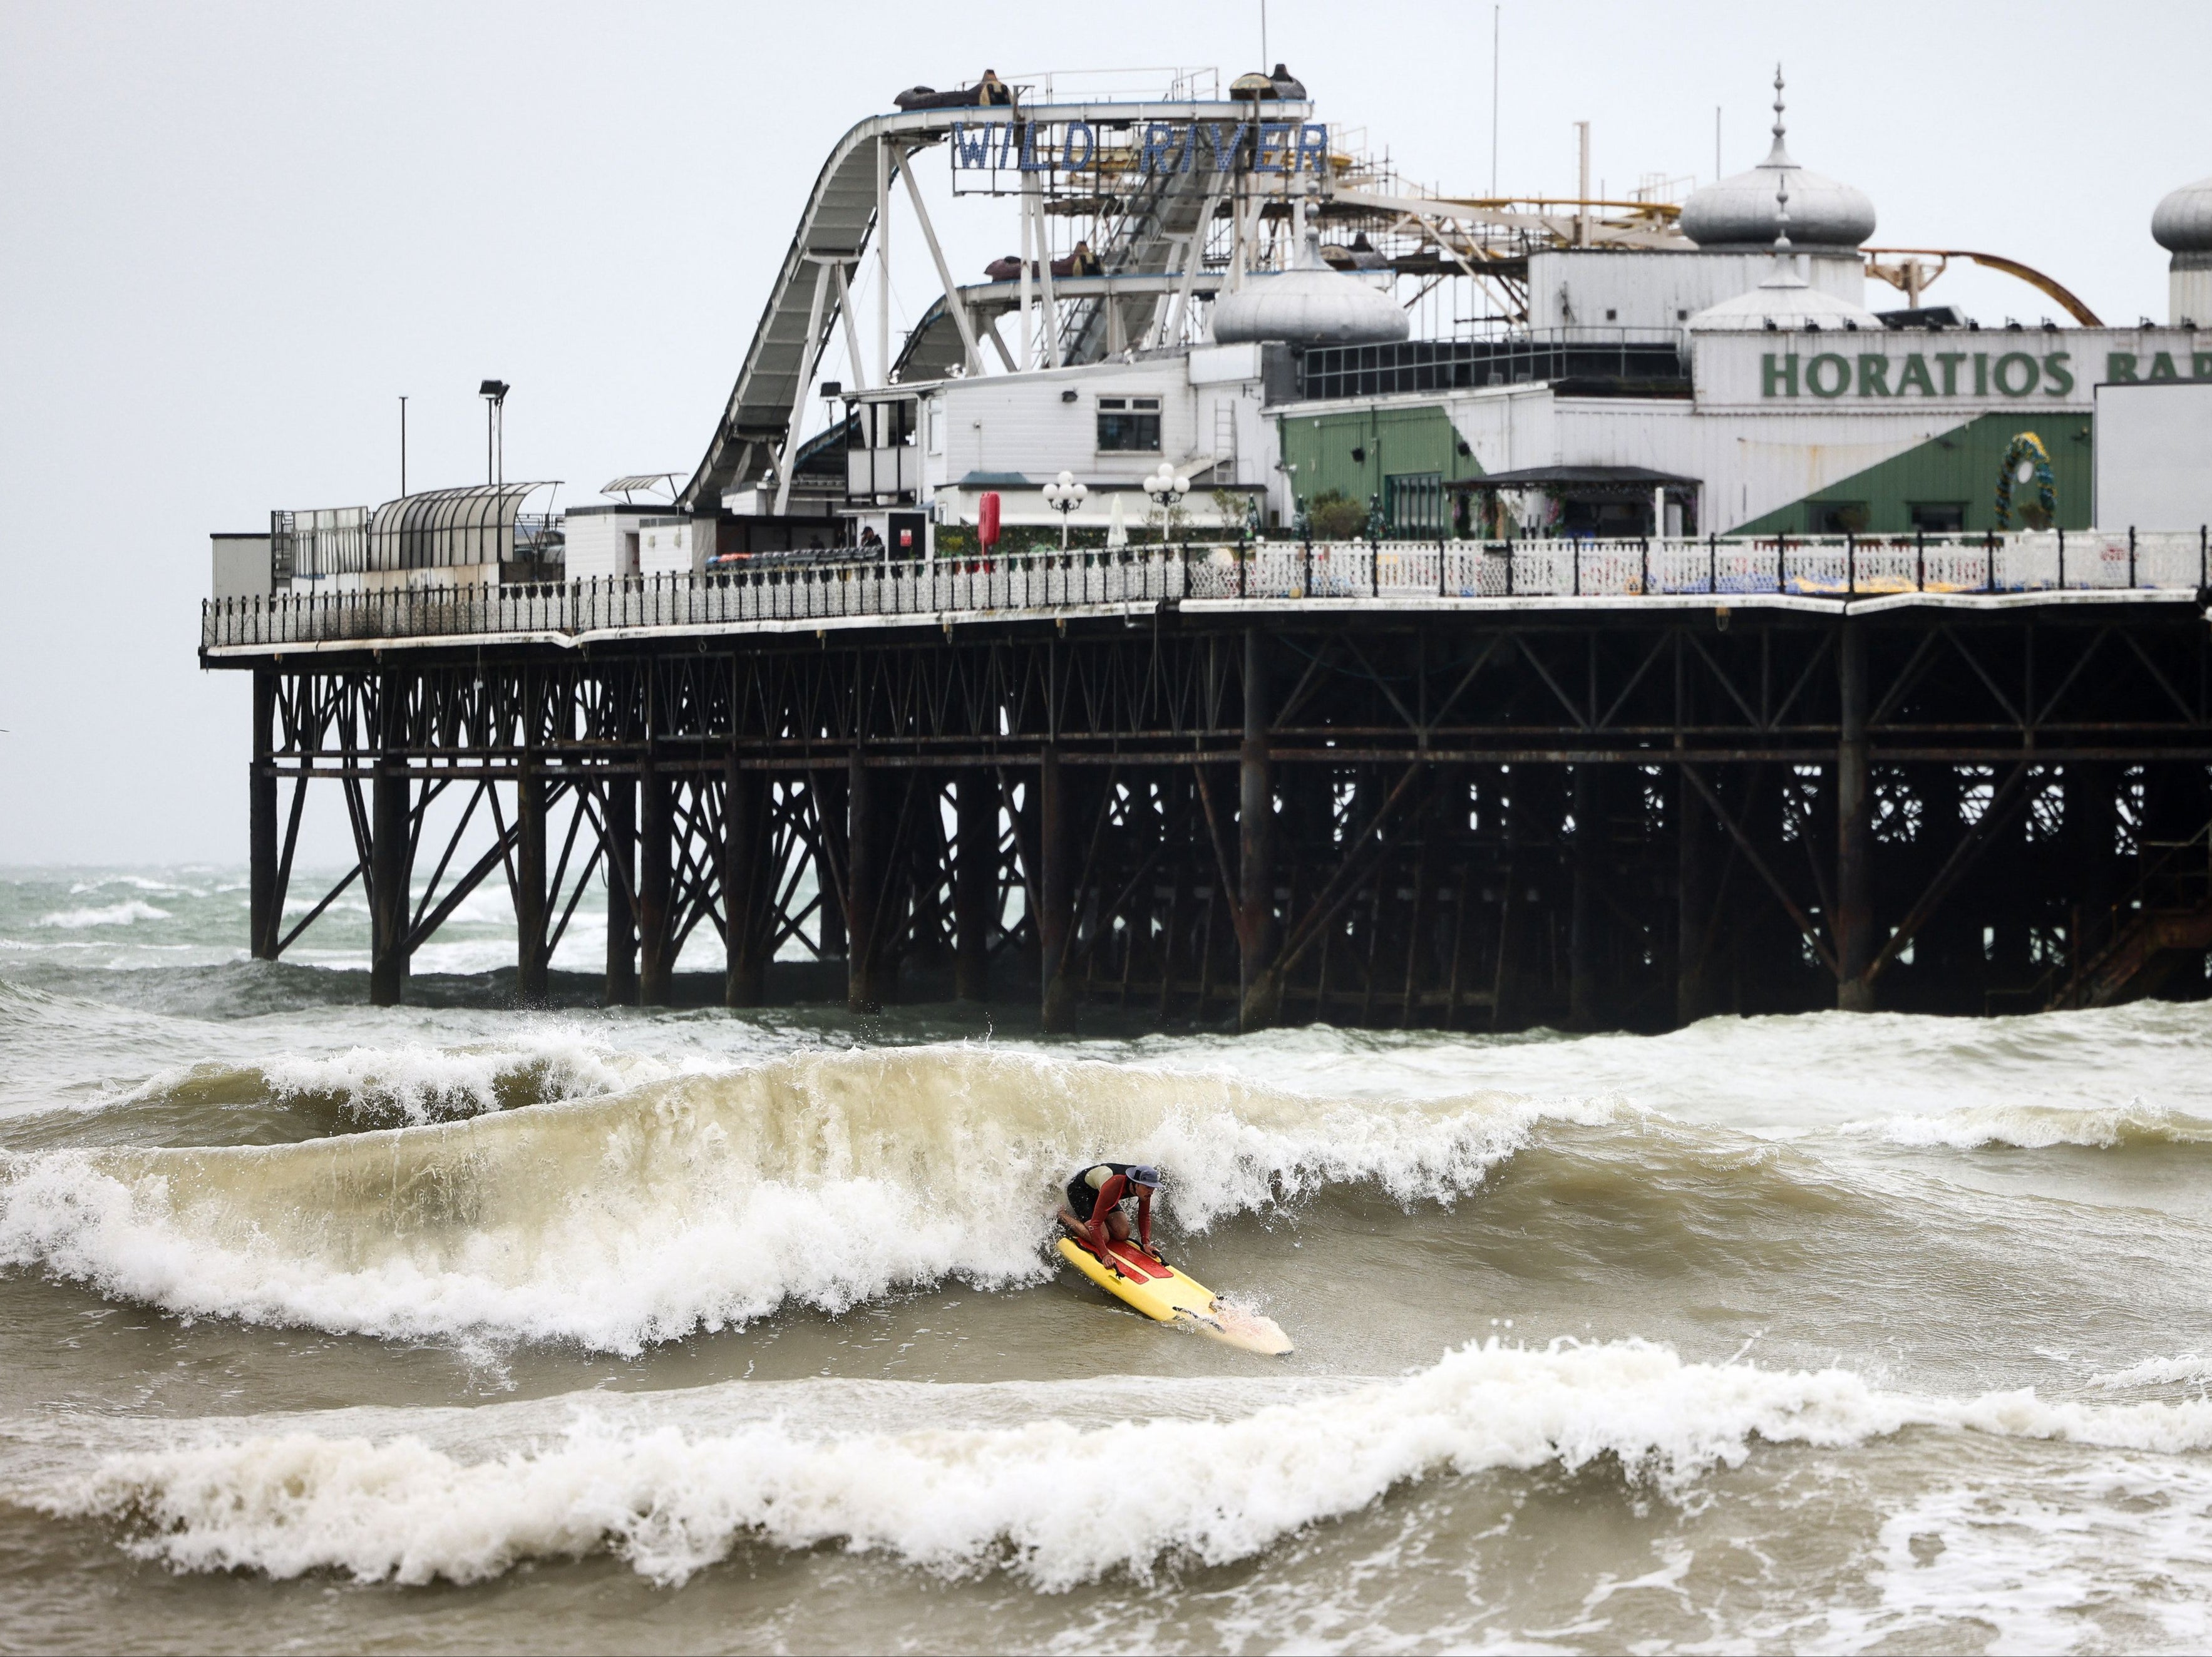 A person attempts to surf next to the Palace Pier in Brighton